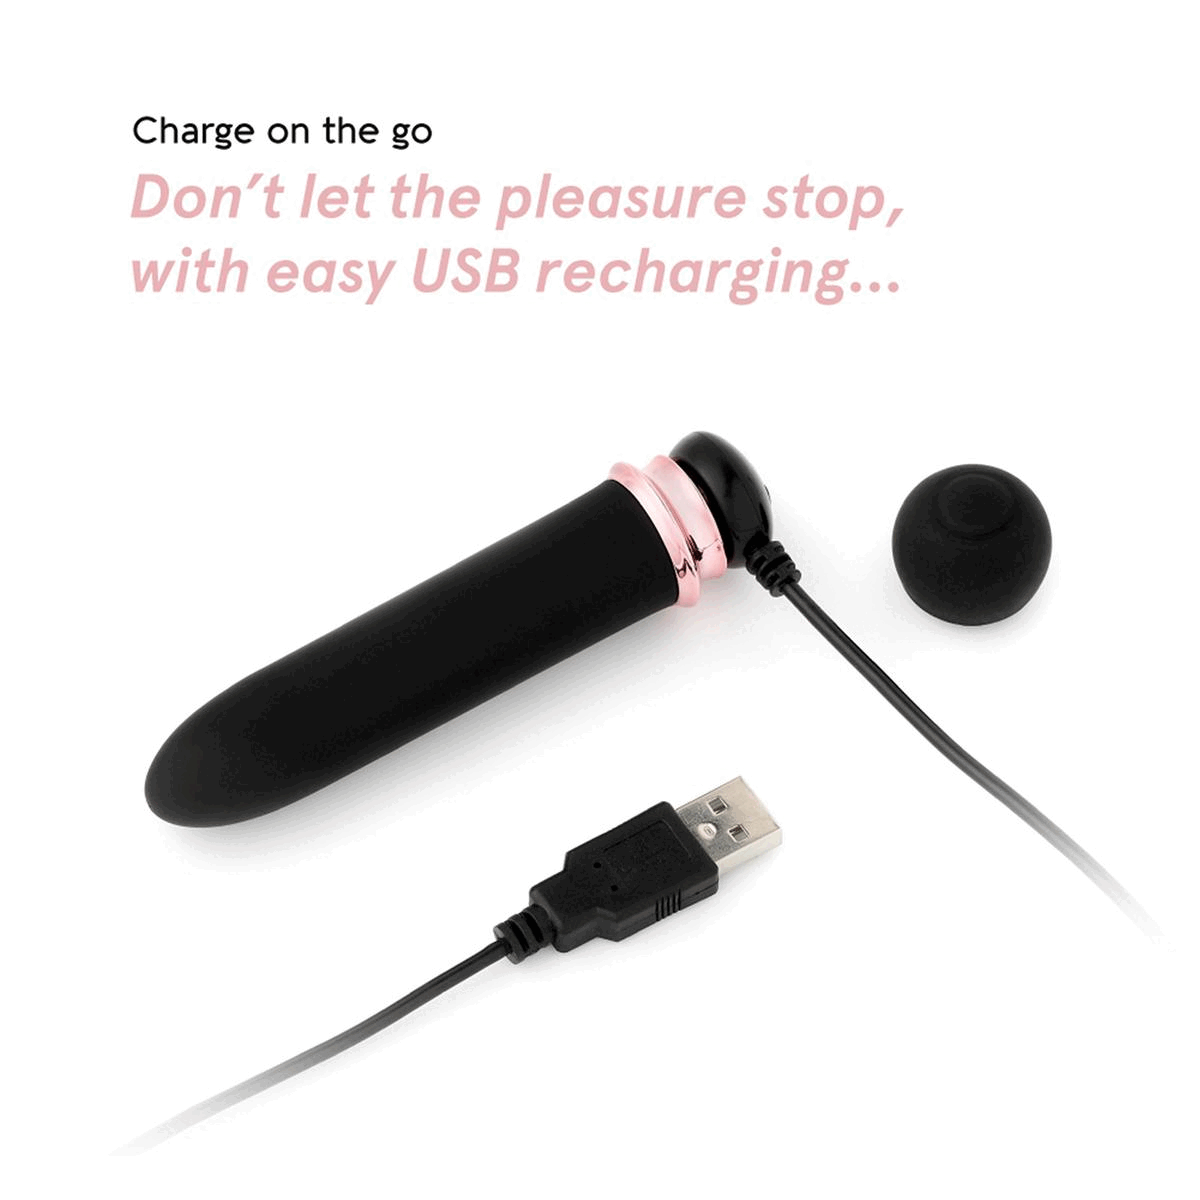 Two images transitioning into each other in an endless loop. Image 1: Charge on the go. Don't let the pleasure stop, with easy USB recharging. Image 2: Pin-point stimulation.